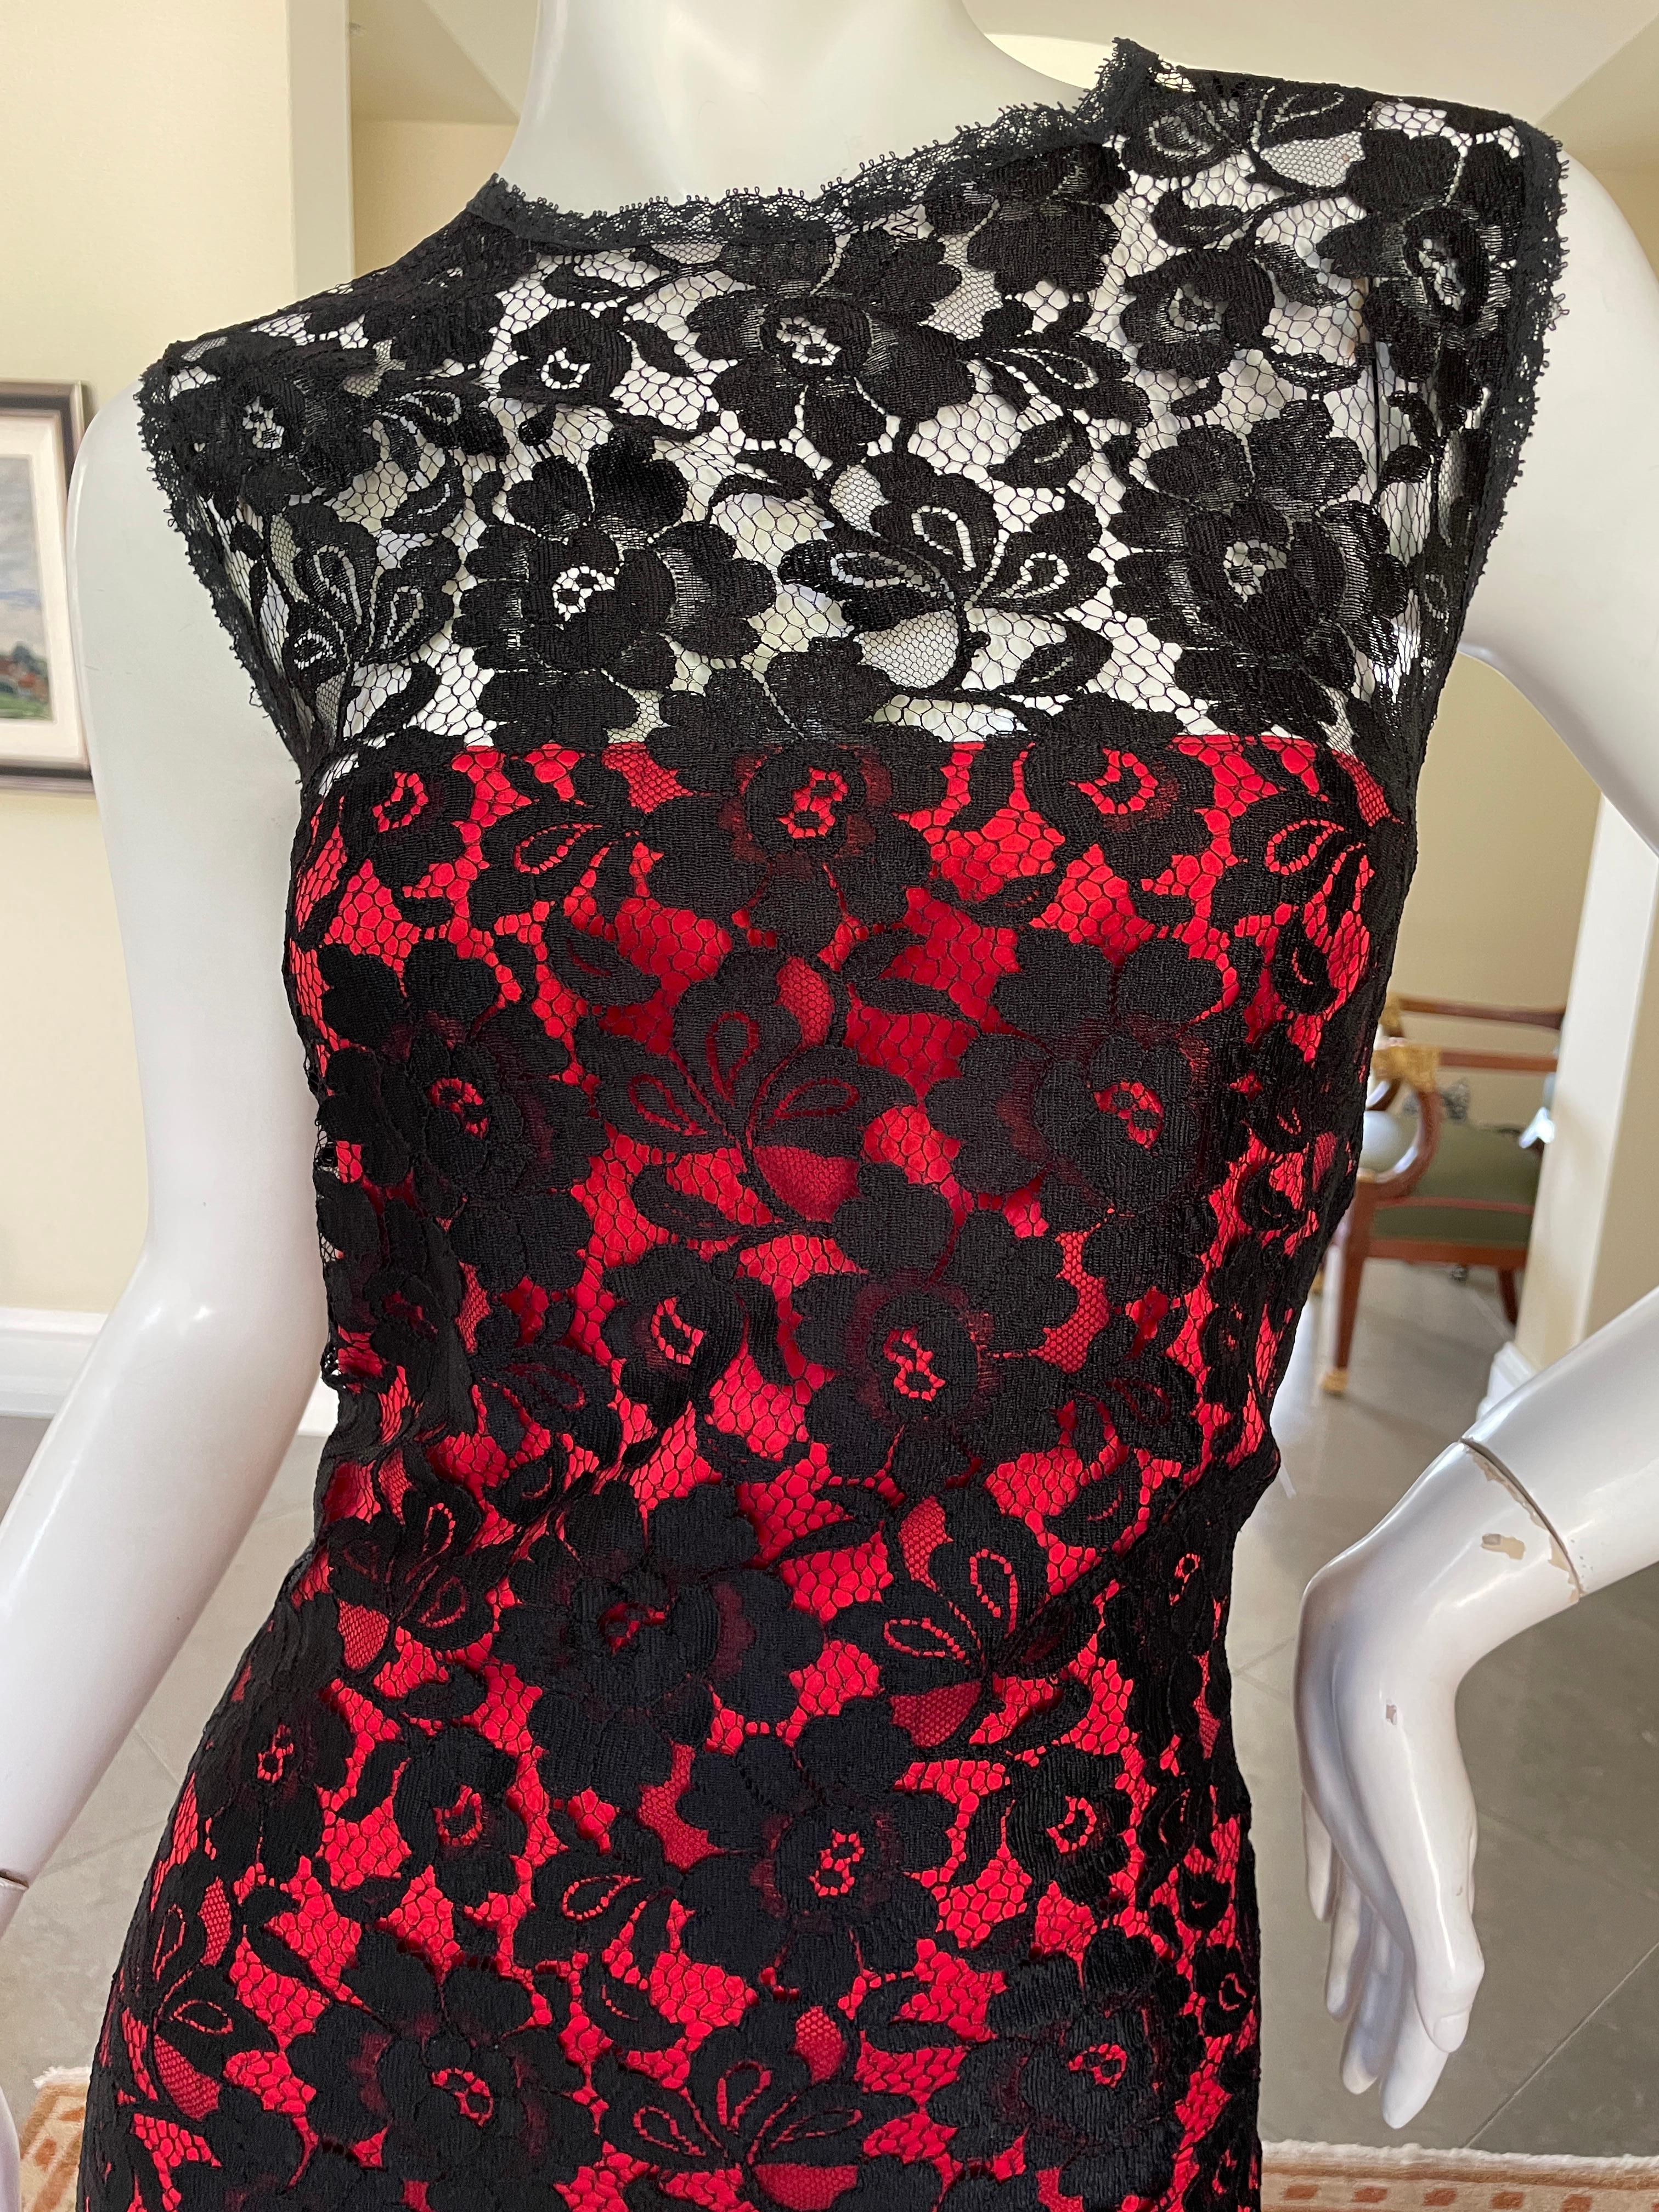 D&G Dolce & Gabbana Red Cocktail Dress with Black Lace Overlay In Excellent Condition For Sale In Cloverdale, CA